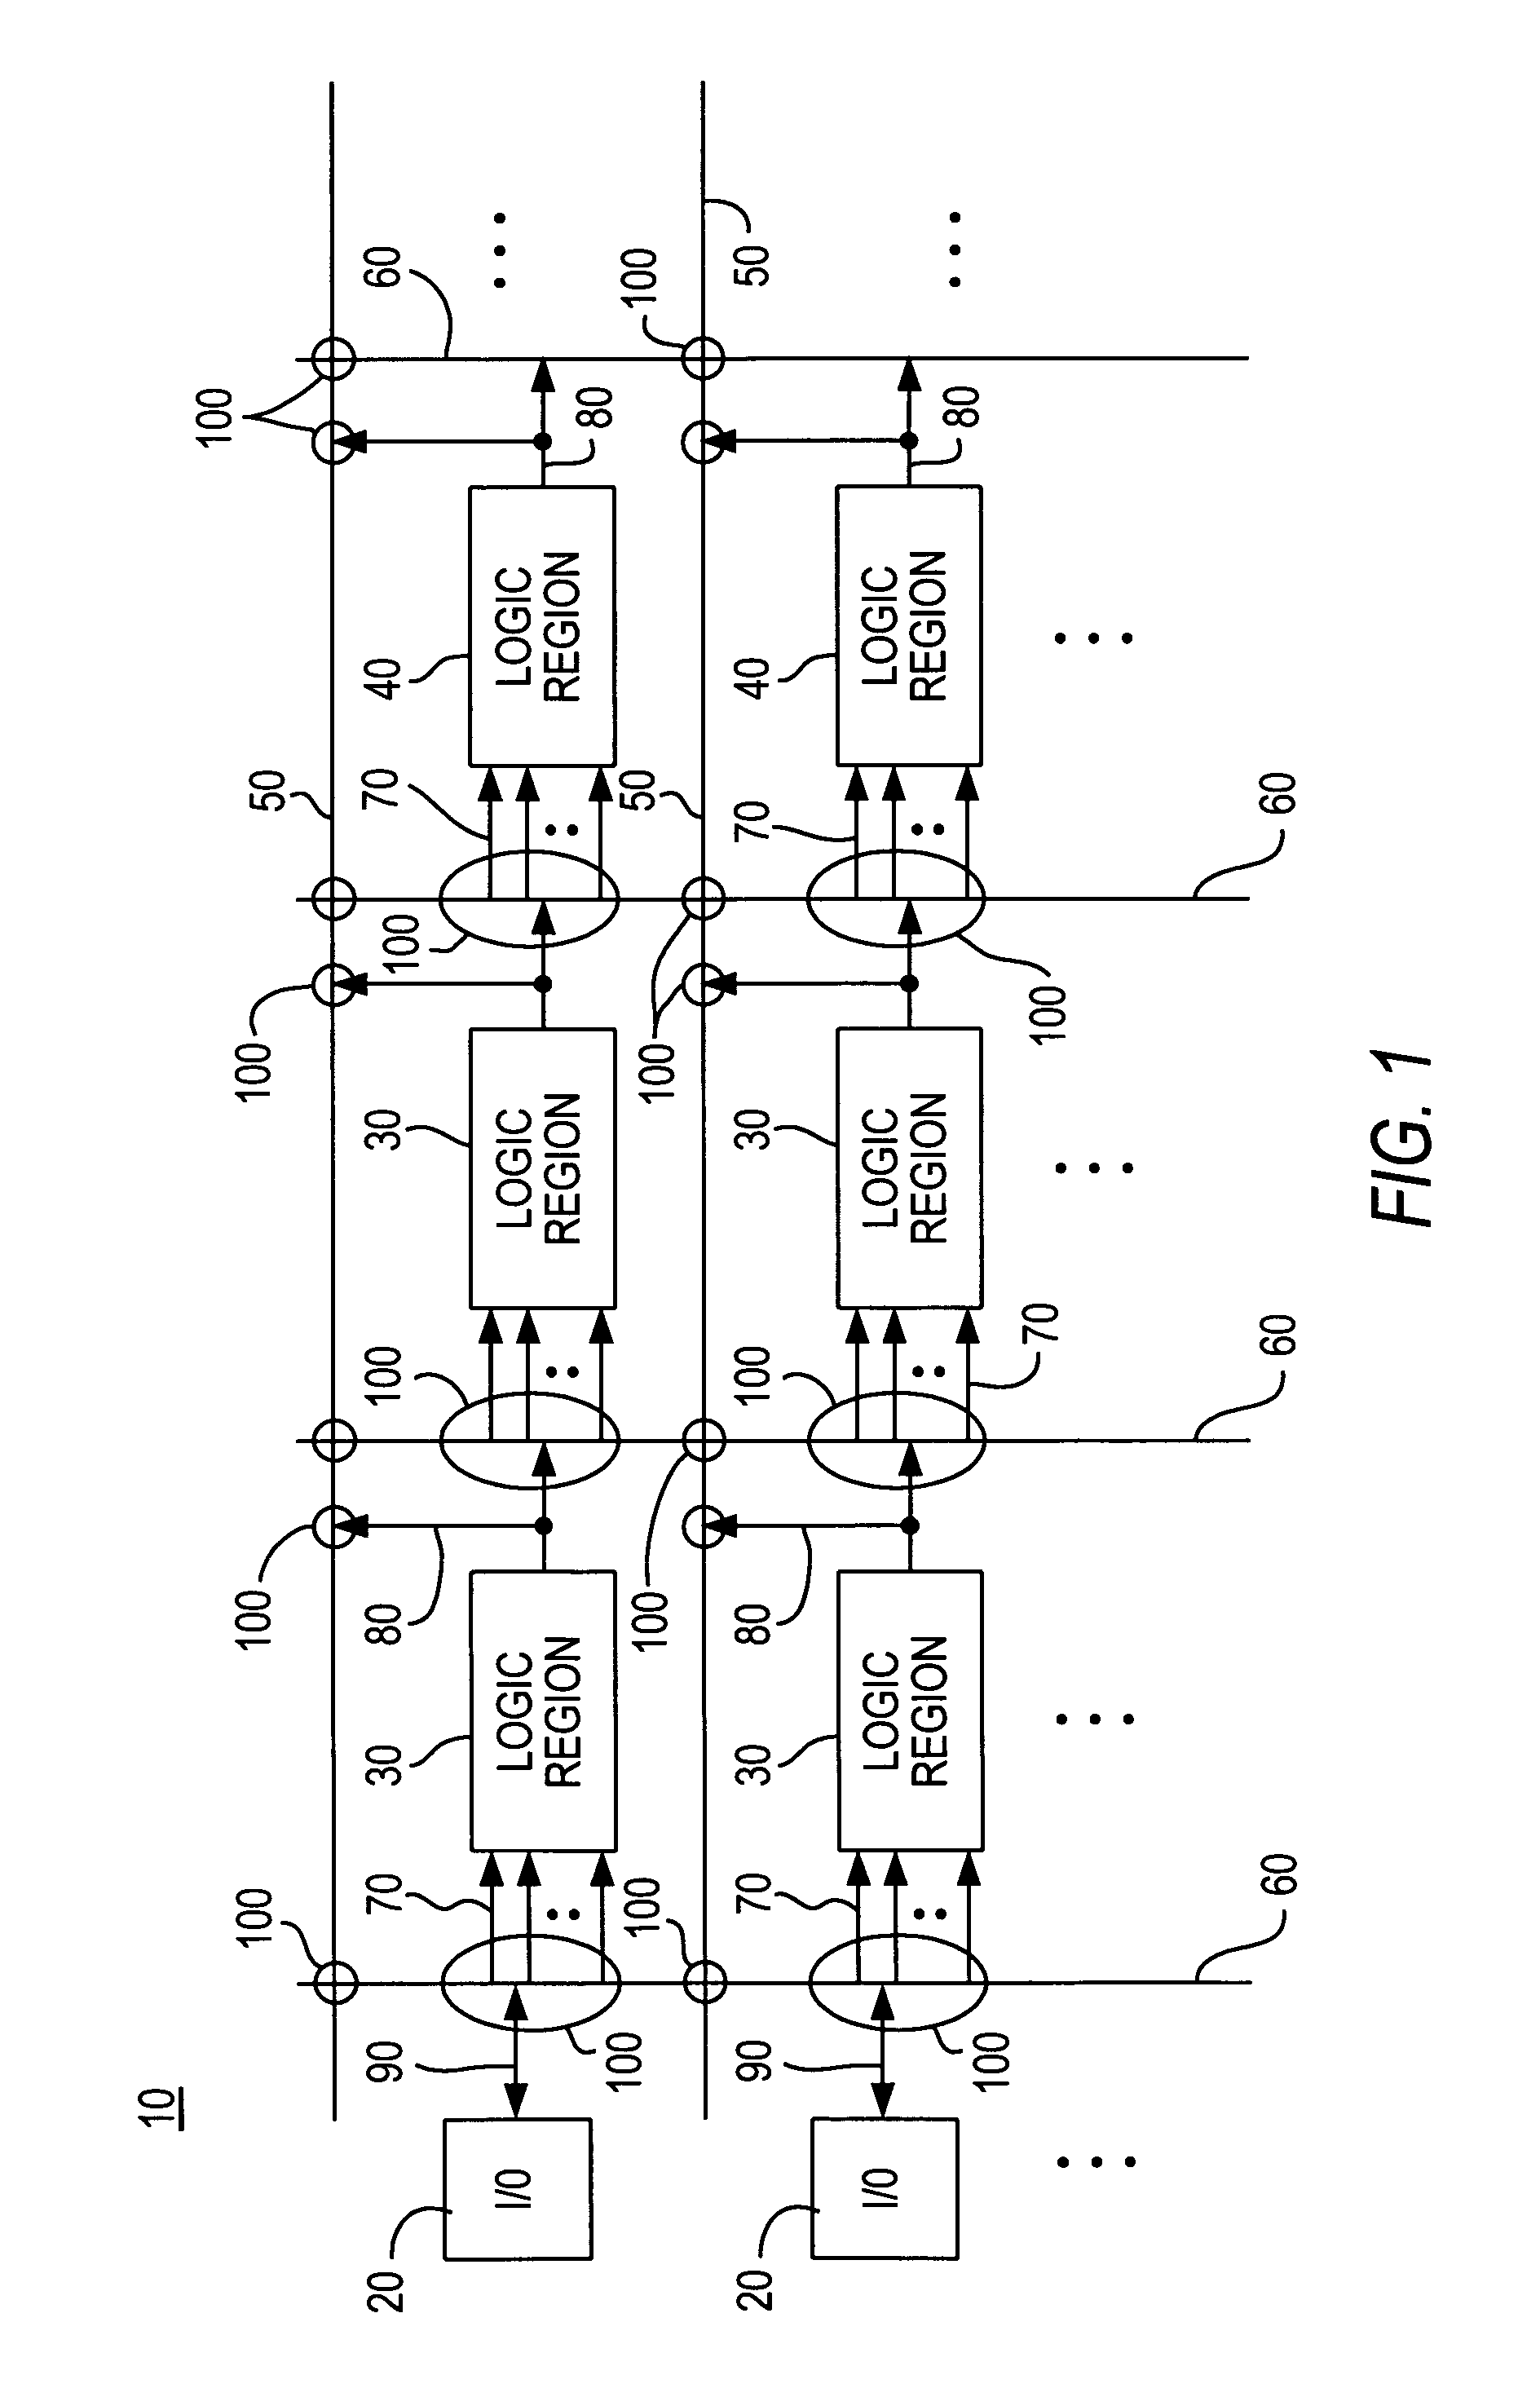 Methods of reducing power in programmable logic devices using low voltage swing for routing signals